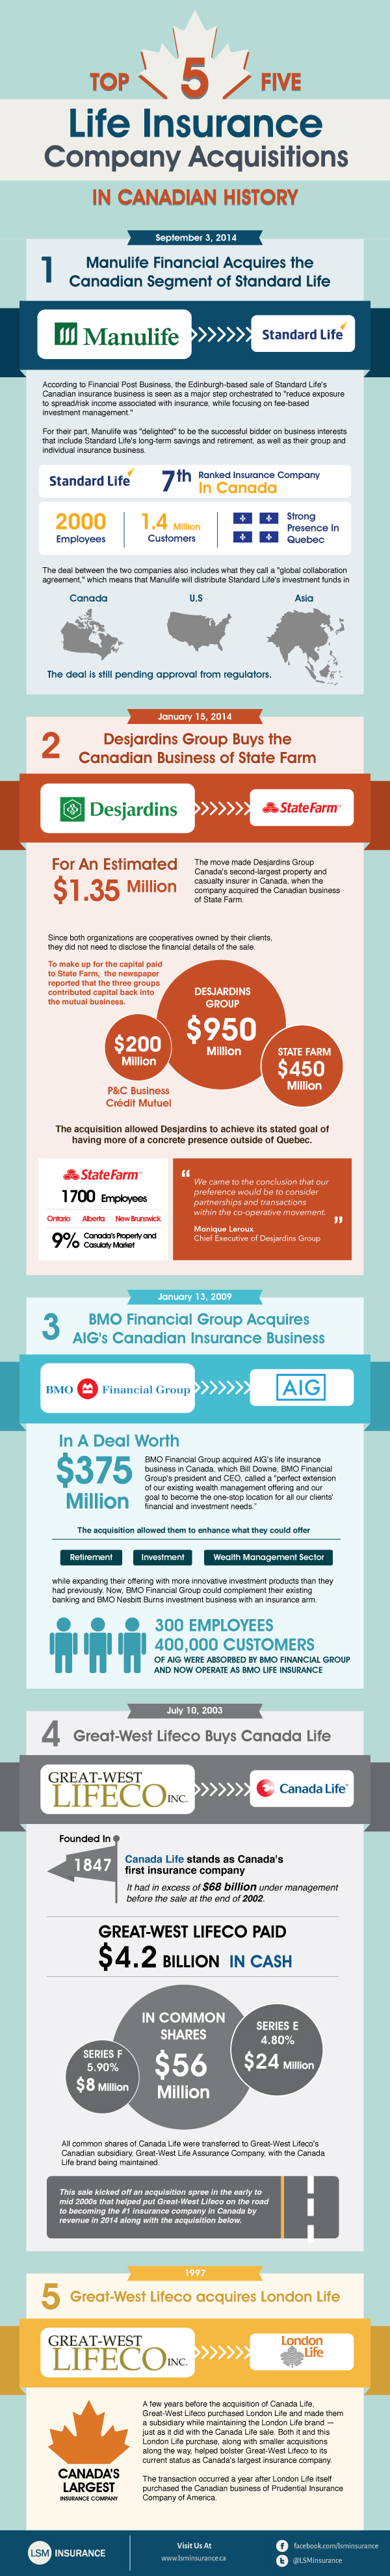 Top 5 Life Insurance Company Acquisitions in Canadian History